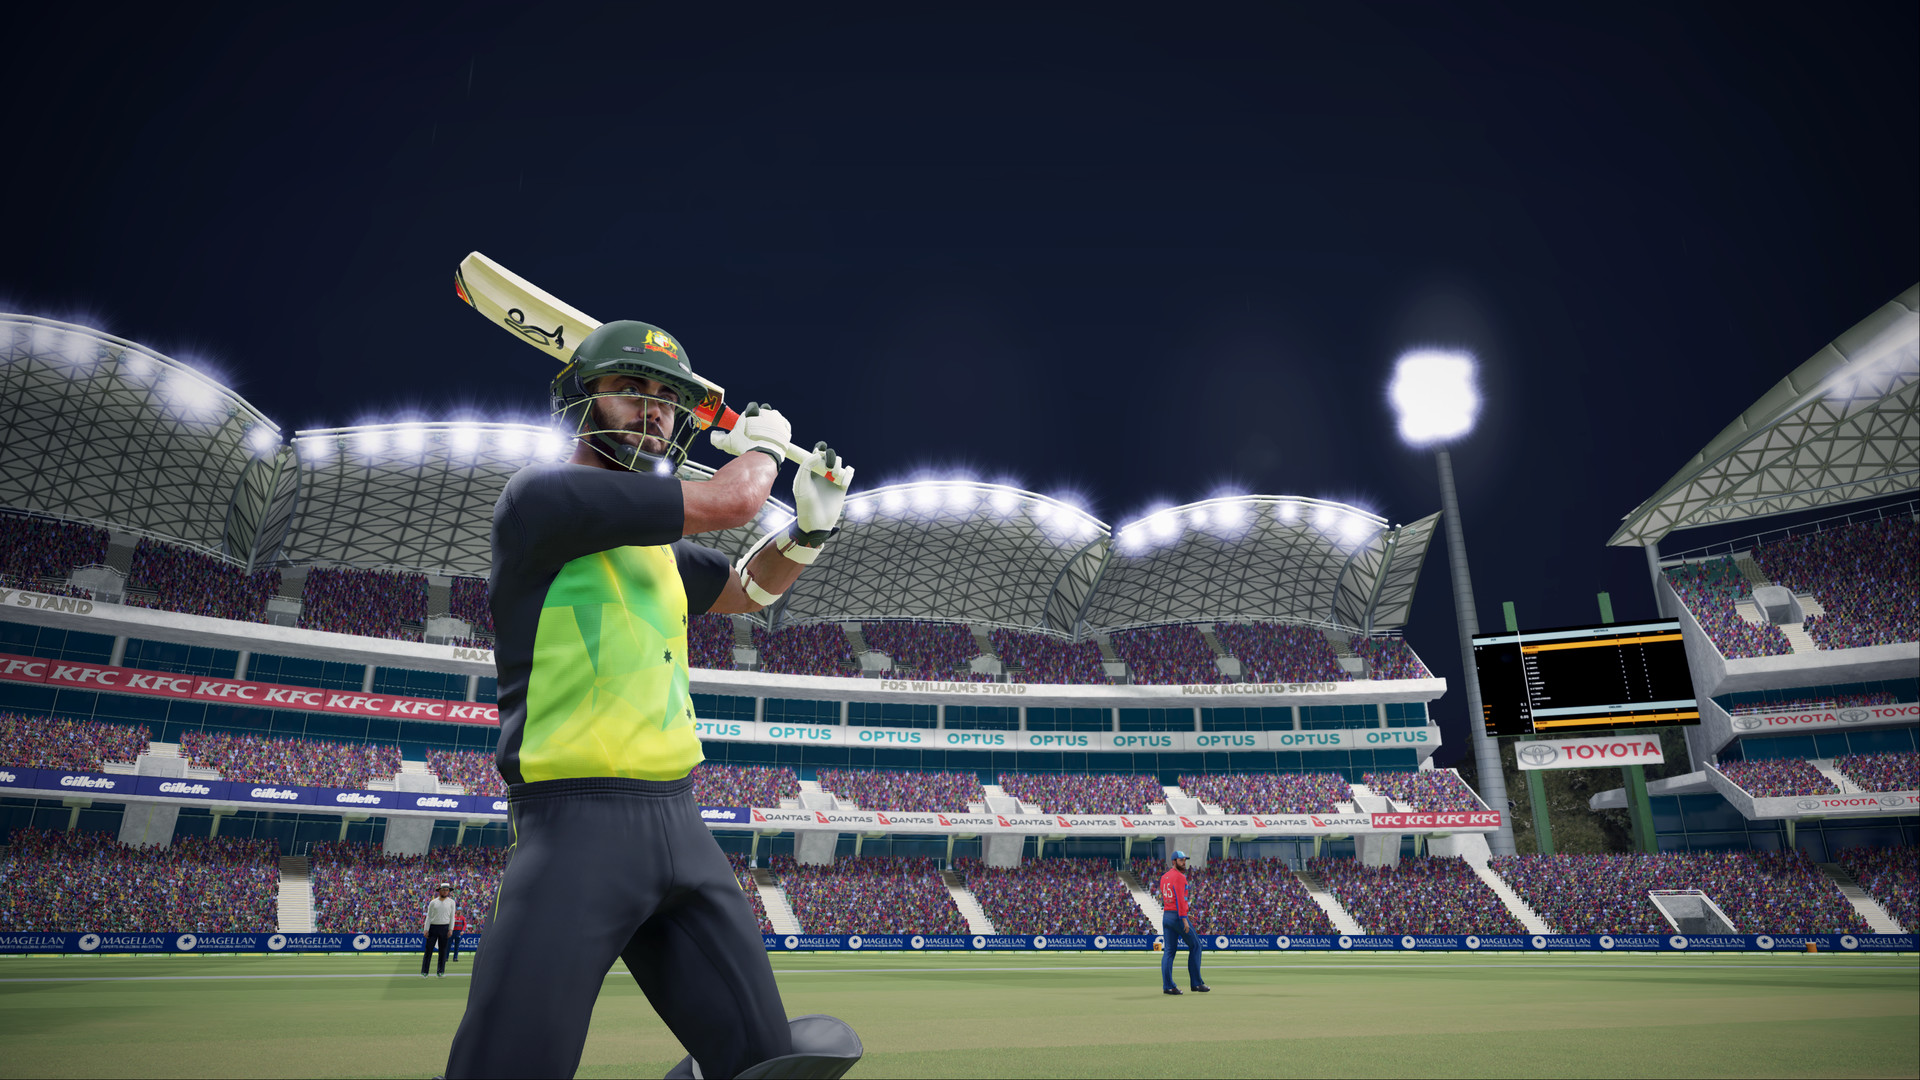 Ashes Cricket 2017 PC Version Game Free Download